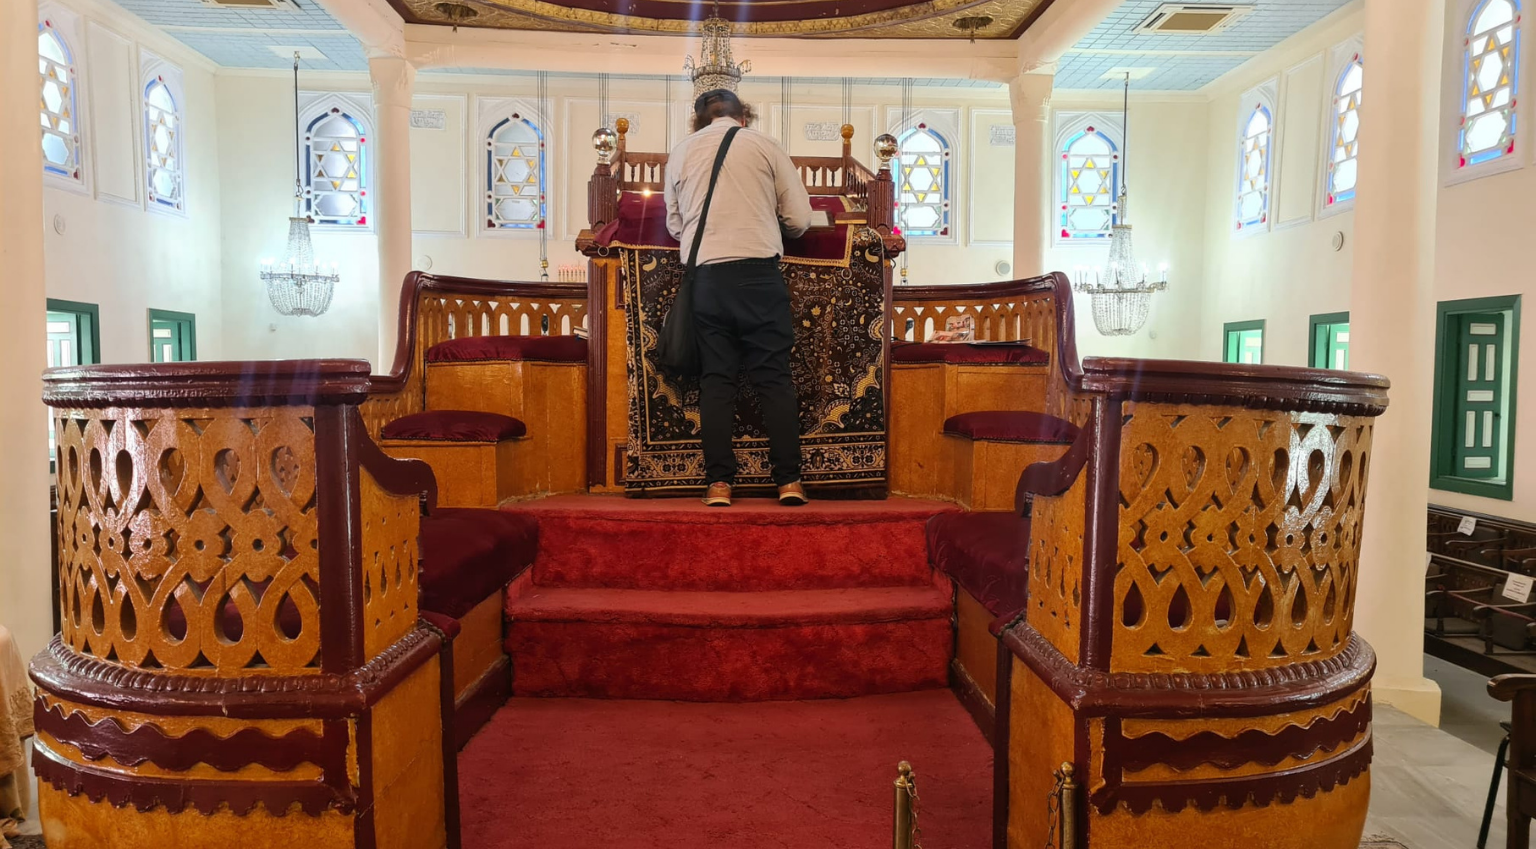 Synagogue Visits In Istanbul